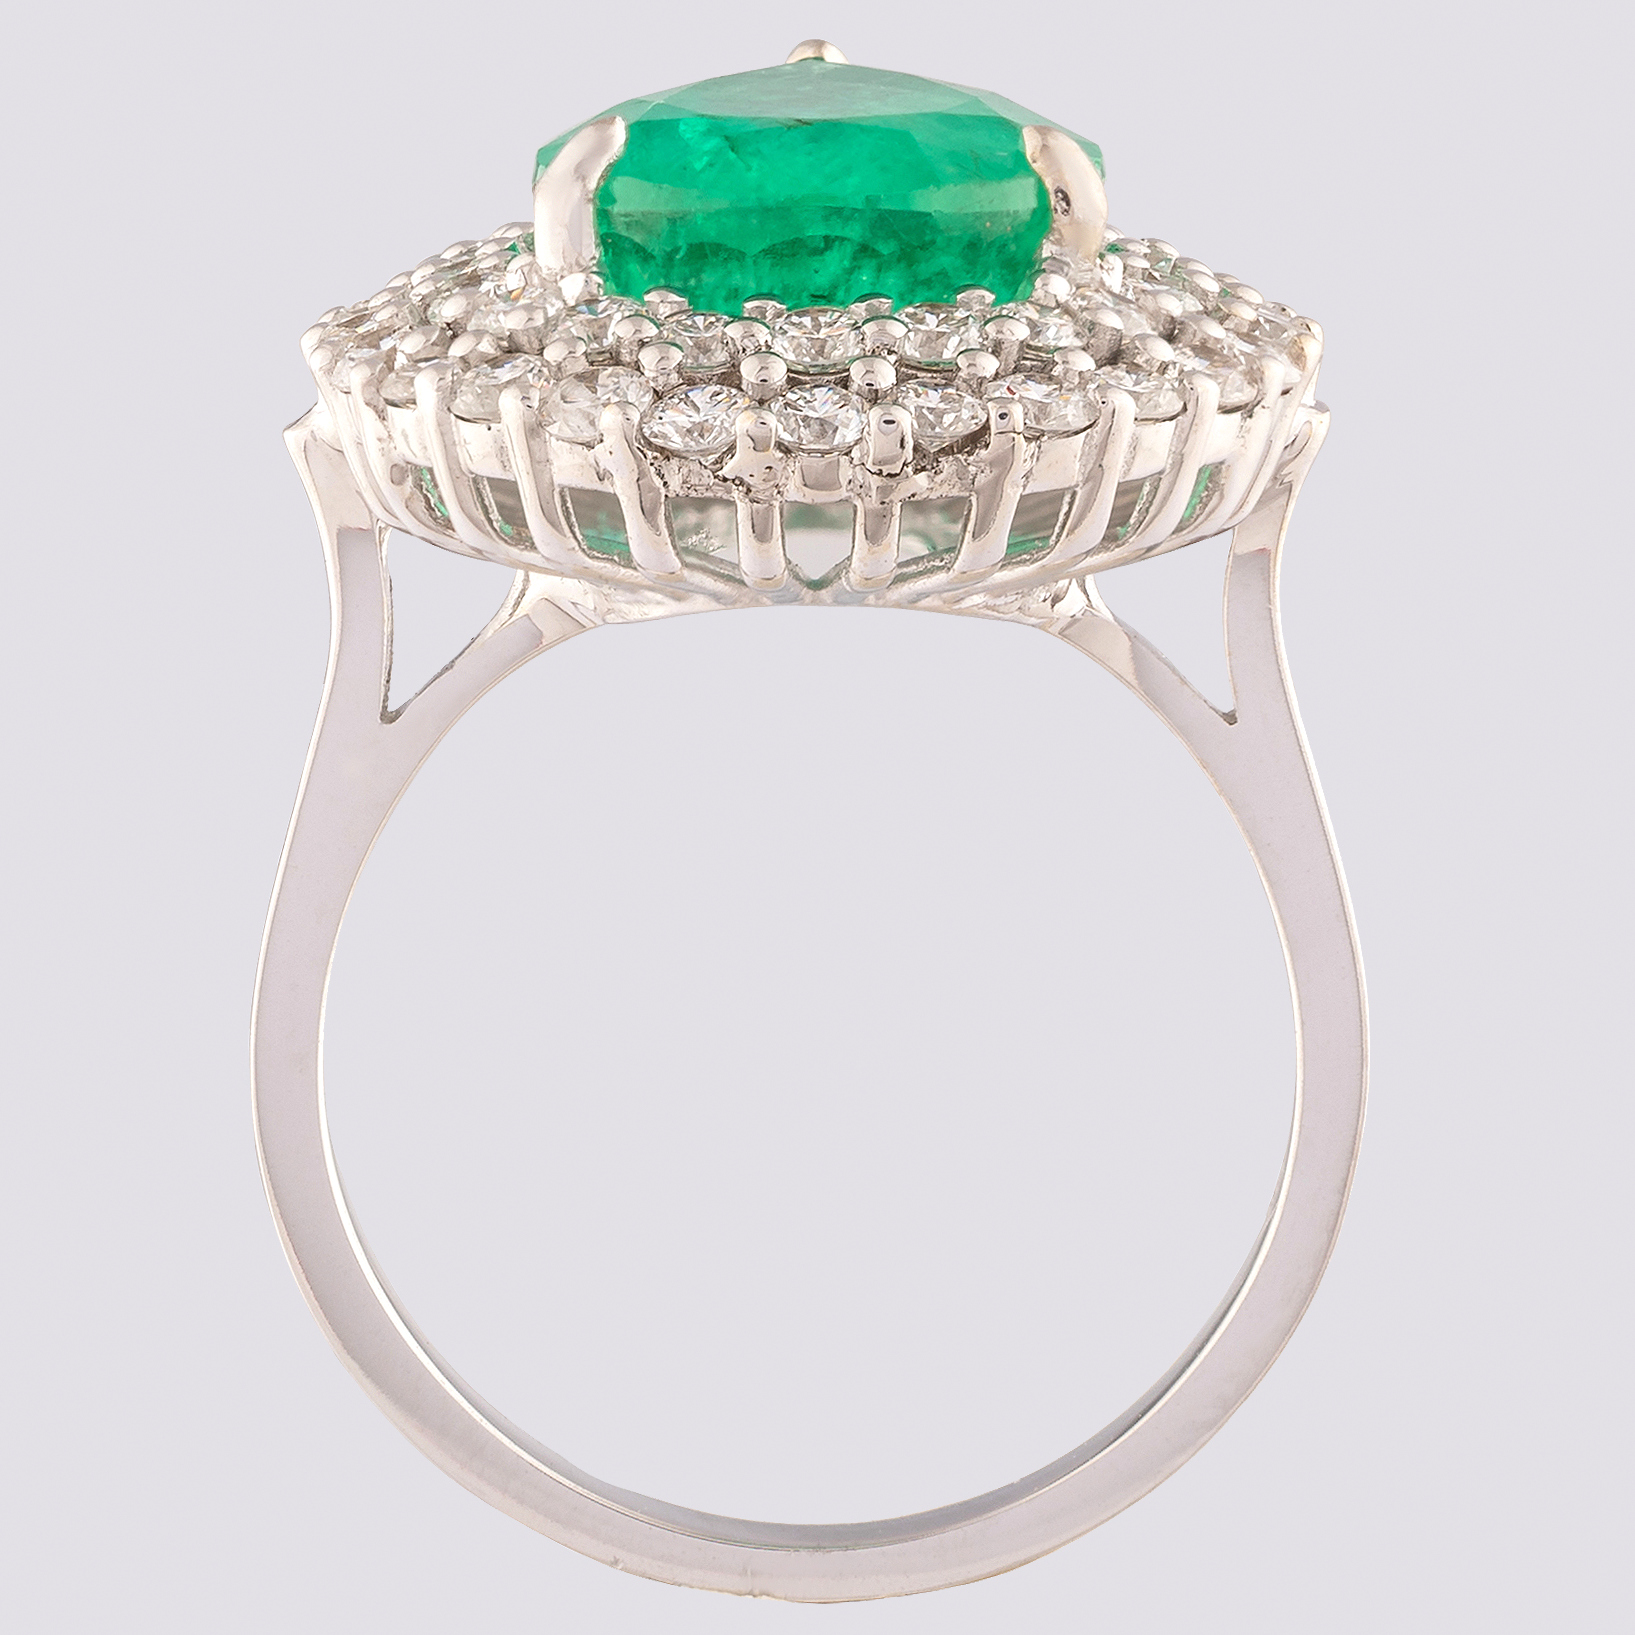 Certificated 14K White Gold Diamond & Emerald Ring - Image 4 of 4